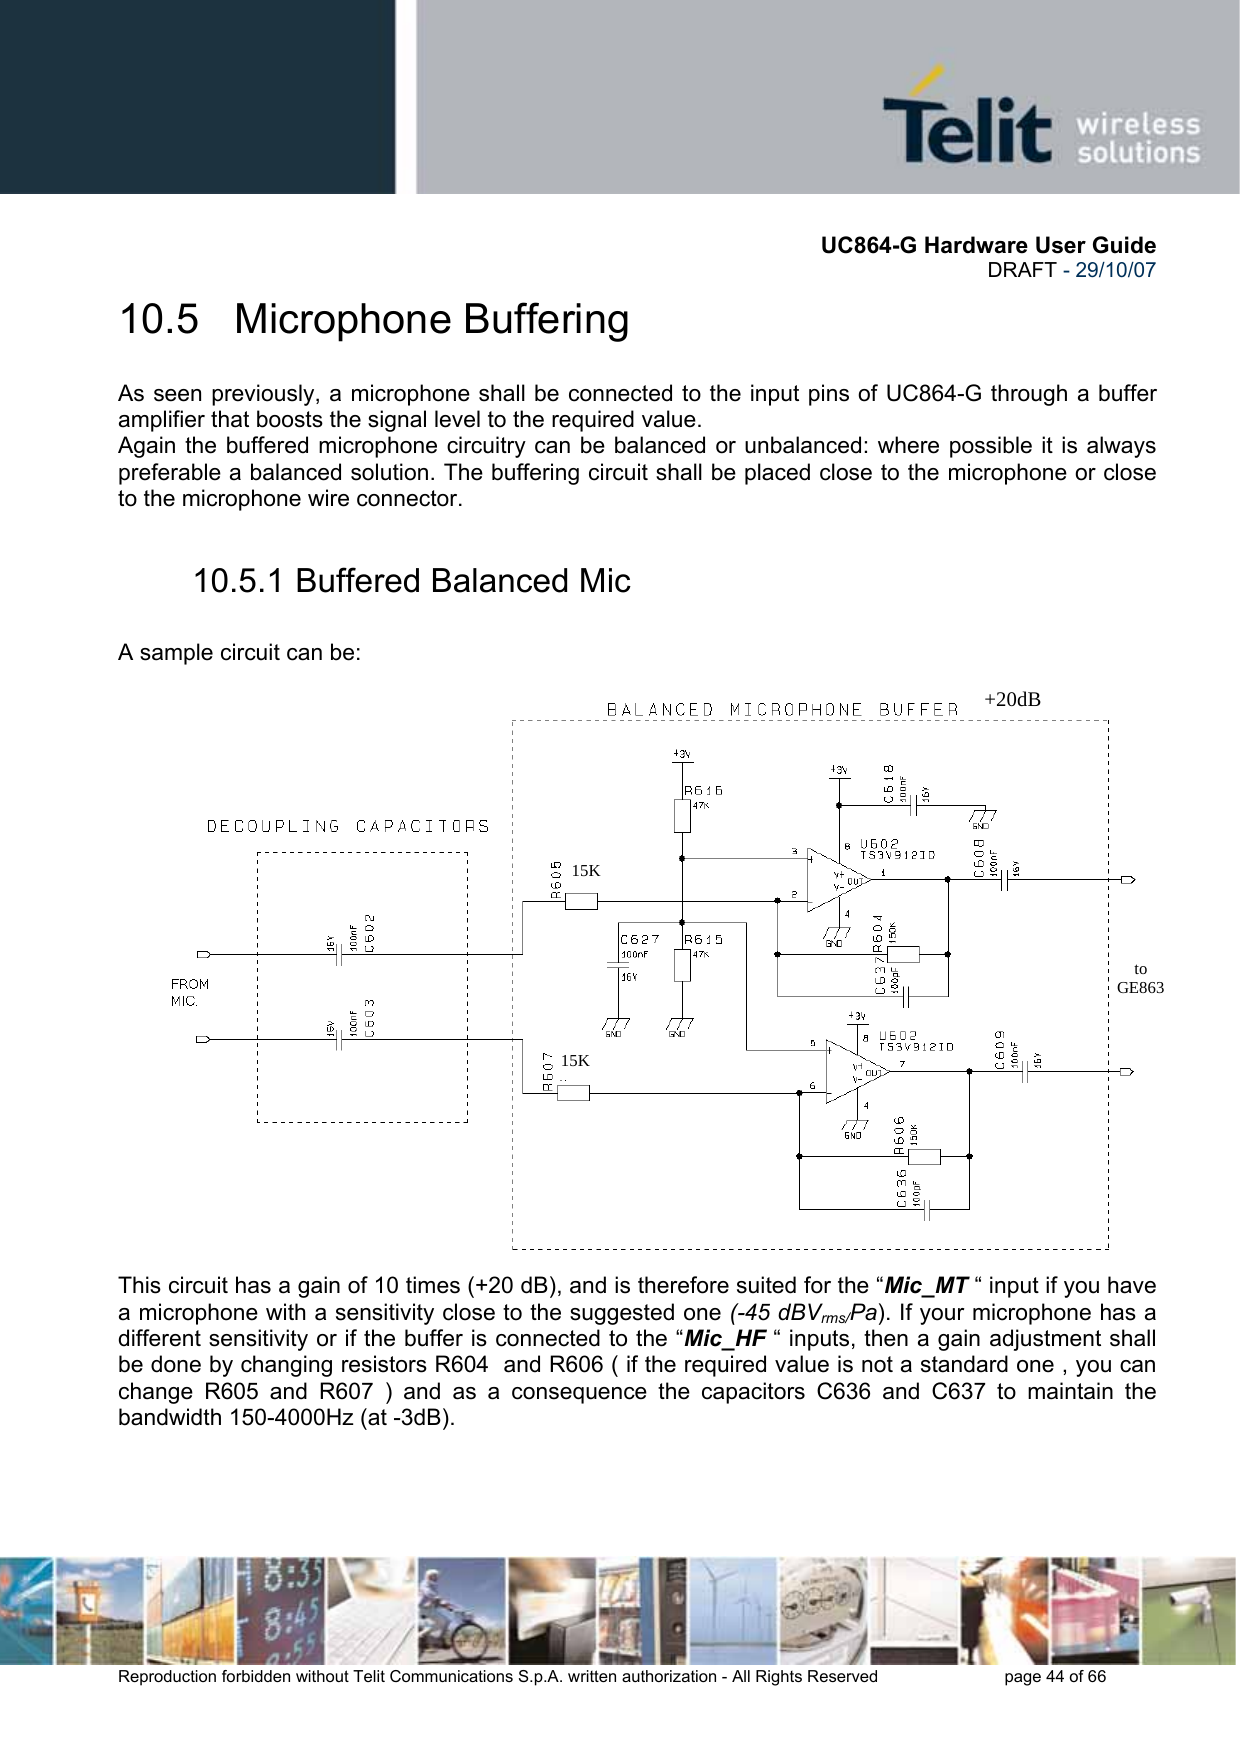       UC864-G Hardware User Guide  DRAFT - 29/10/07      Reproduction forbidden without Telit Communications S.p.A. written authorization - All Rights Reserved    page 44 of 66  10.5   Microphone Buffering As seen previously, a microphone shall be connected to the input pins of UC864-G through a buffer amplifier that boosts the signal level to the required value. Again the buffered microphone circuitry can be balanced or unbalanced: where possible it is always preferable a balanced solution. The buffering circuit shall be placed close to the microphone or close to the microphone wire connector. 10.5.1 Buffered Balanced Mic  A sample circuit can be: This circuit has a gain of 10 times (+20 dB), and is therefore suited for the “Mic_MT “ input if you have a microphone with a sensitivity close to the suggested one (-45 dBVrms/Pa). If your microphone has a different sensitivity or if the buffer is connected to the “Mic_HF “ inputs, then a gain adjustment shall be done by changing resistors R604  and R606 ( if the required value is not a standard one , you can change R605 and R607 ) and as a consequence the capacitors C636 and C637 to maintain the bandwidth 150-4000Hz (at -3dB).  270pF  270pF  +20dB 15K15Kto GE863